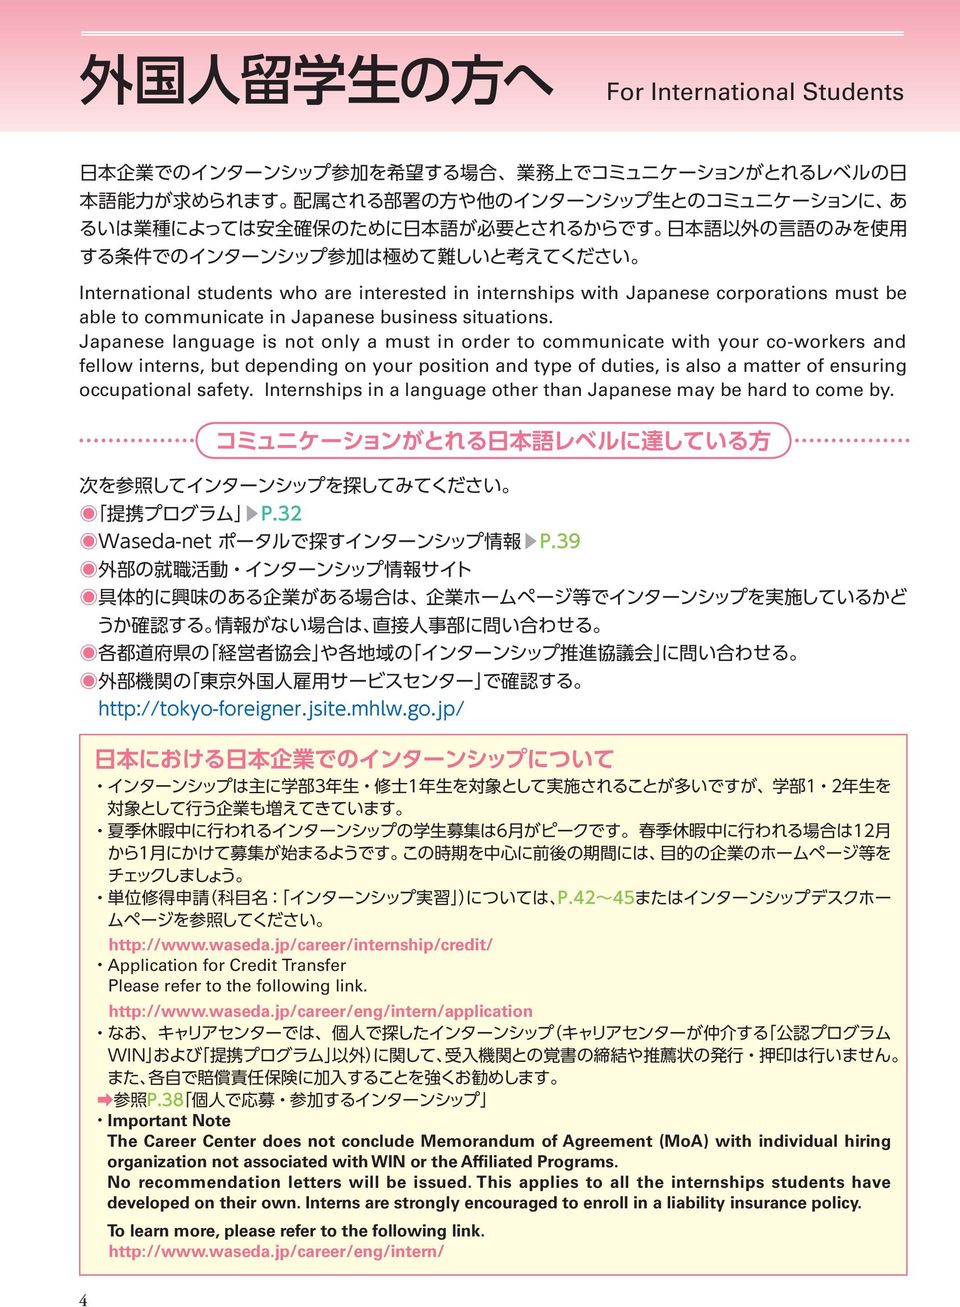 safety. Internships in a language other than Japanese may be hard to come by. http://www.waseda.jp/career/internship/credit/ Application for Credit Transfer Please refer to the following link.